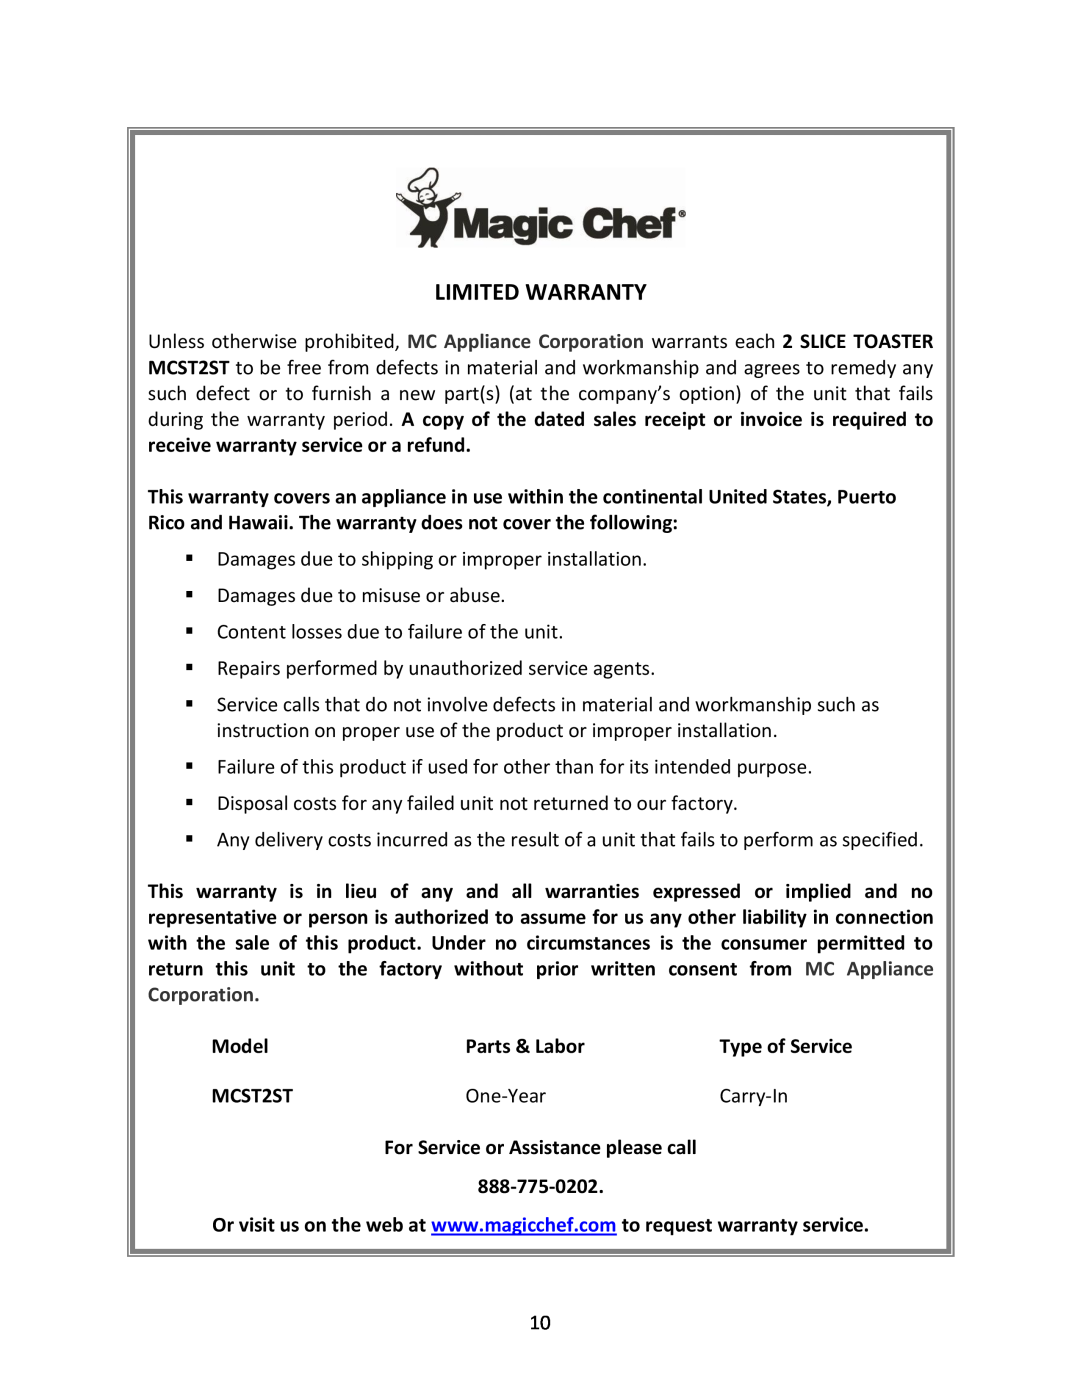 Magic Chef MCST2ST instruction manual Model, Parts & Labor, One-Year, Carry-In, Limited Warranty 